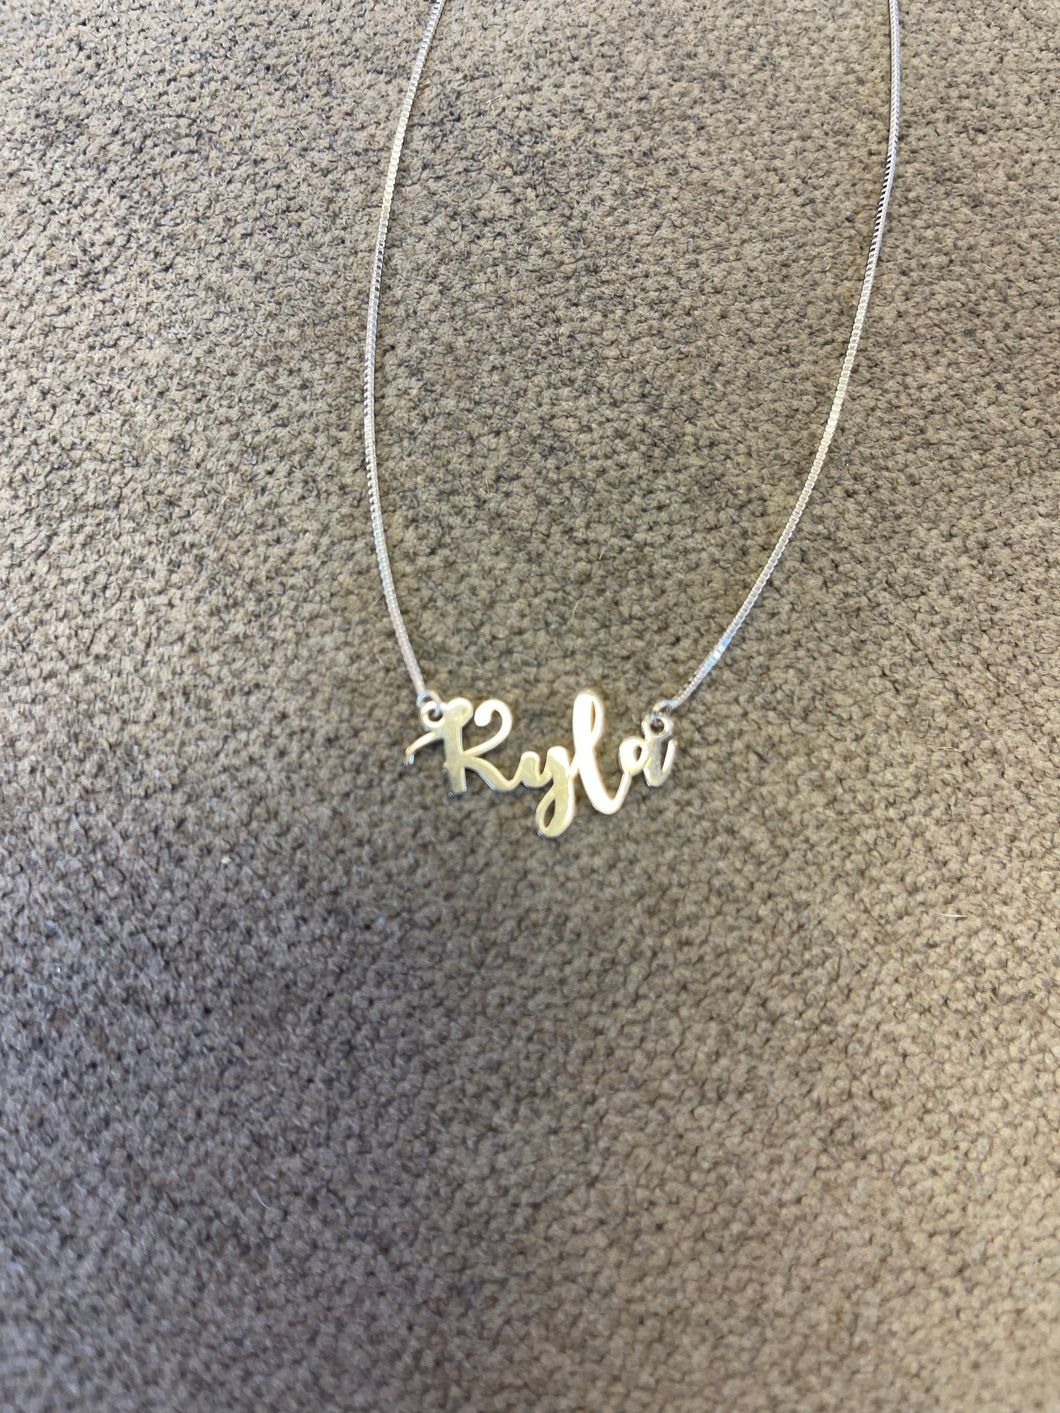 Custom Necklace in Sassy Font